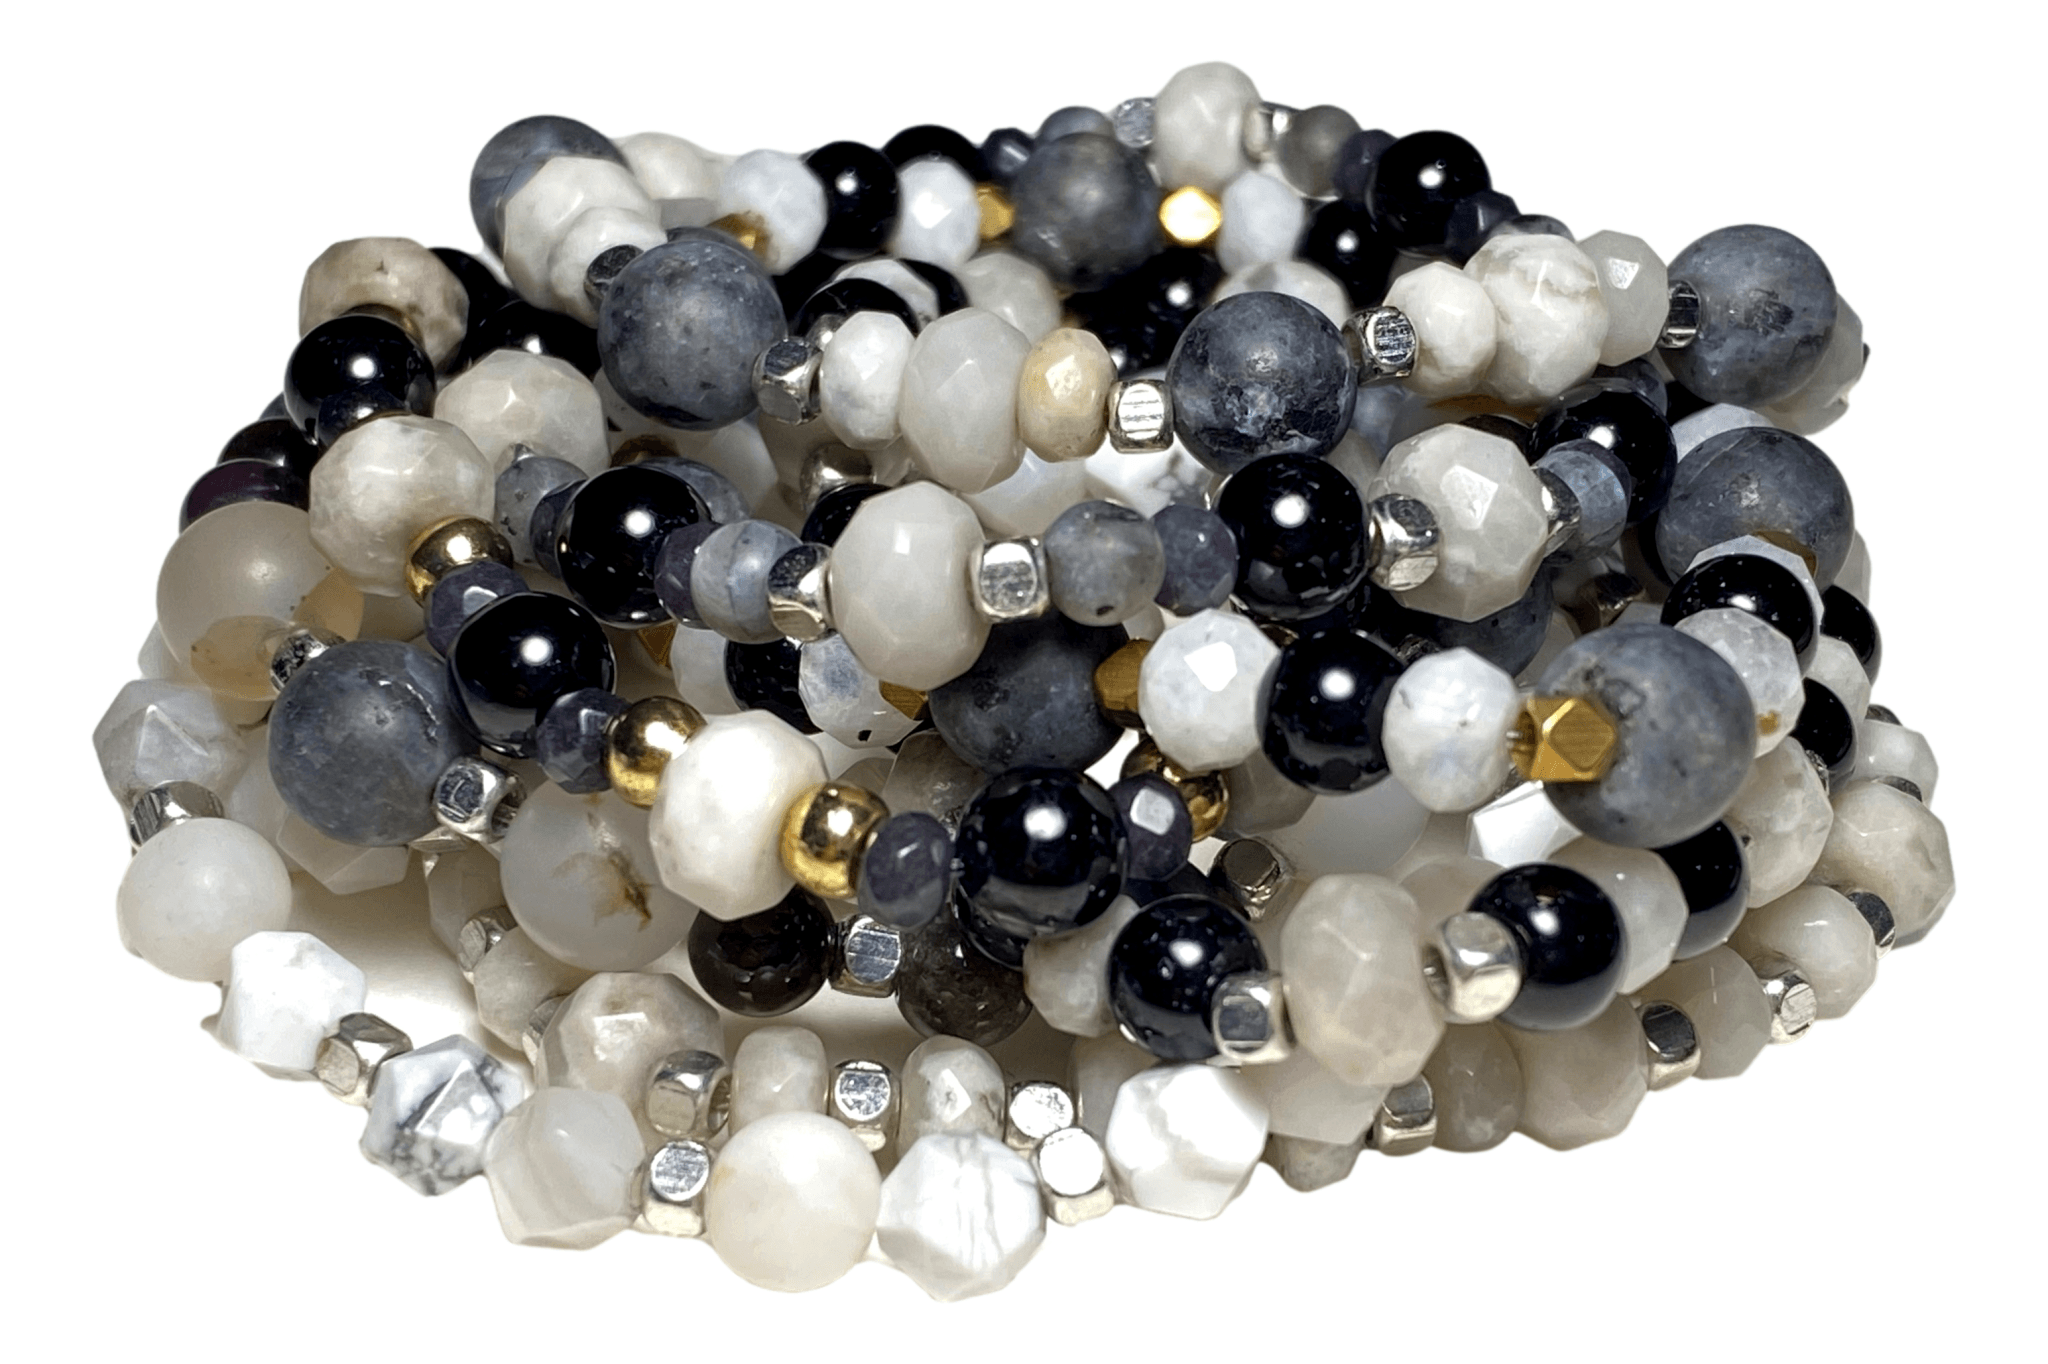 Bracelet Stretch Crystal Beads Assorted Grey Semi-precious Beadstyles Select a Saint Handmade by Skilled Artisan 2 1/2 W Inches - Ysleta Mission Gift Shop- VOTED El Paso's Best Gift Shop